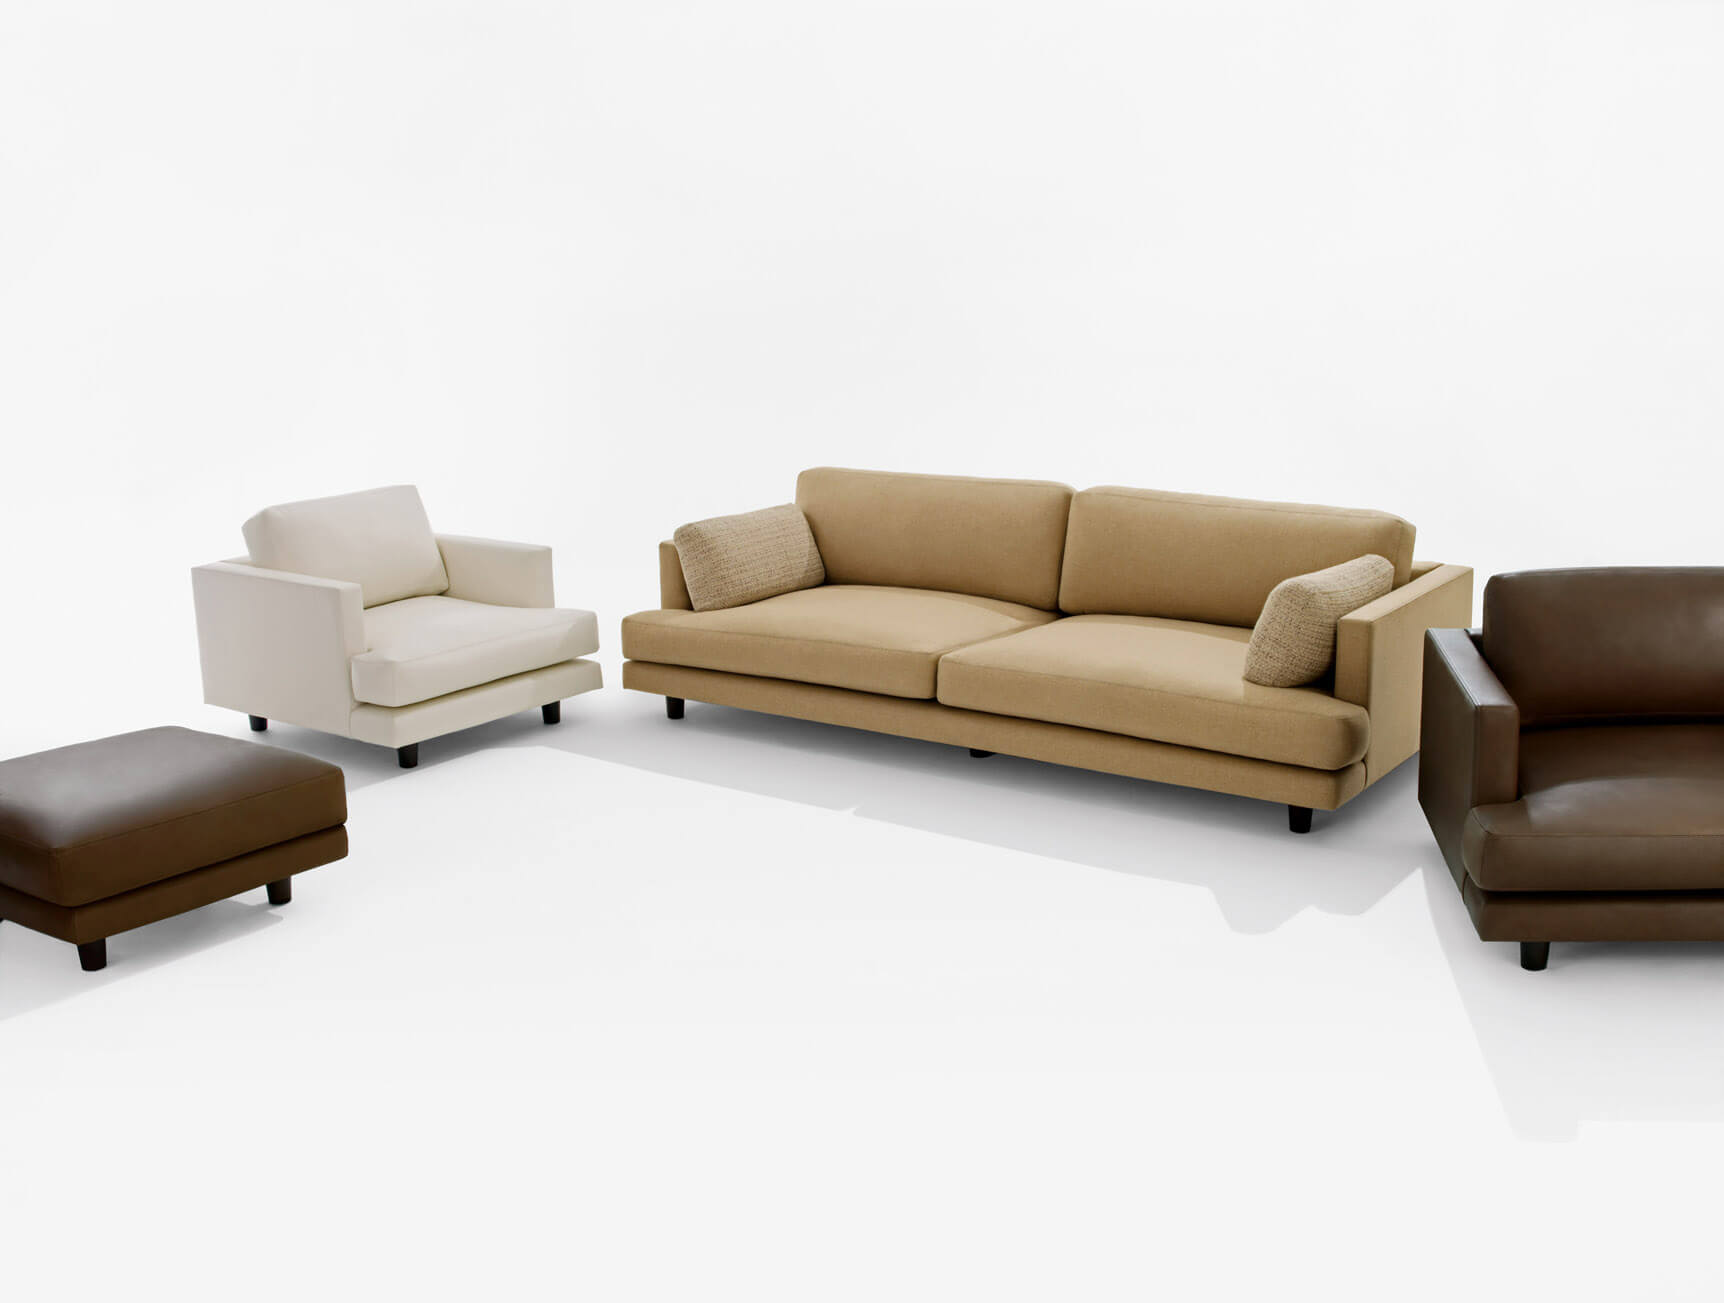 D Urso Residential Sofa and chairs